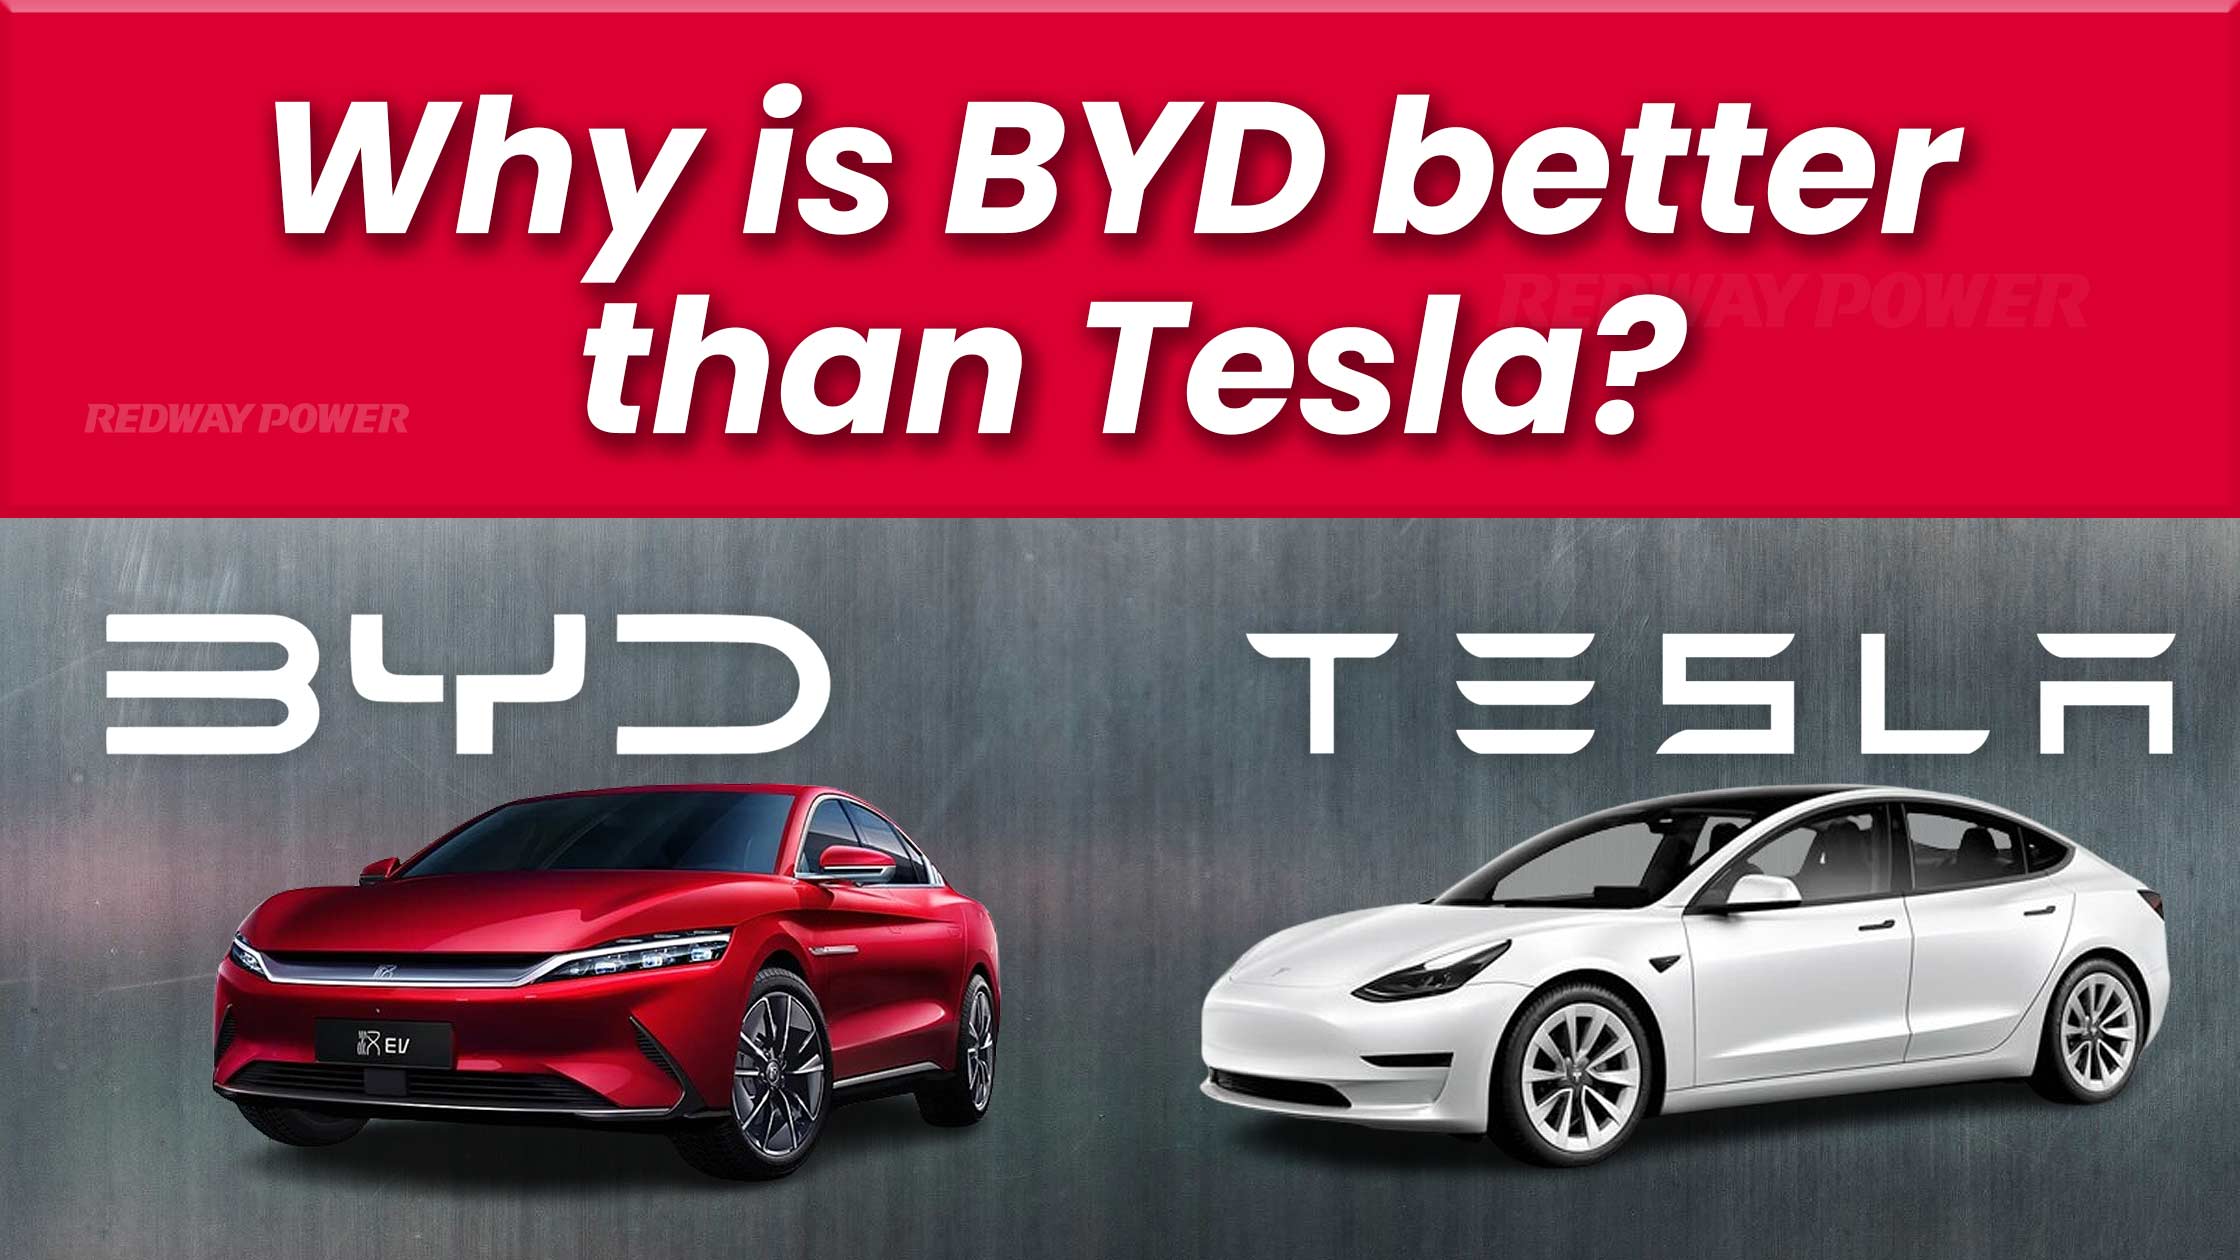 Why is BYD better than Tesla? / Redway Power